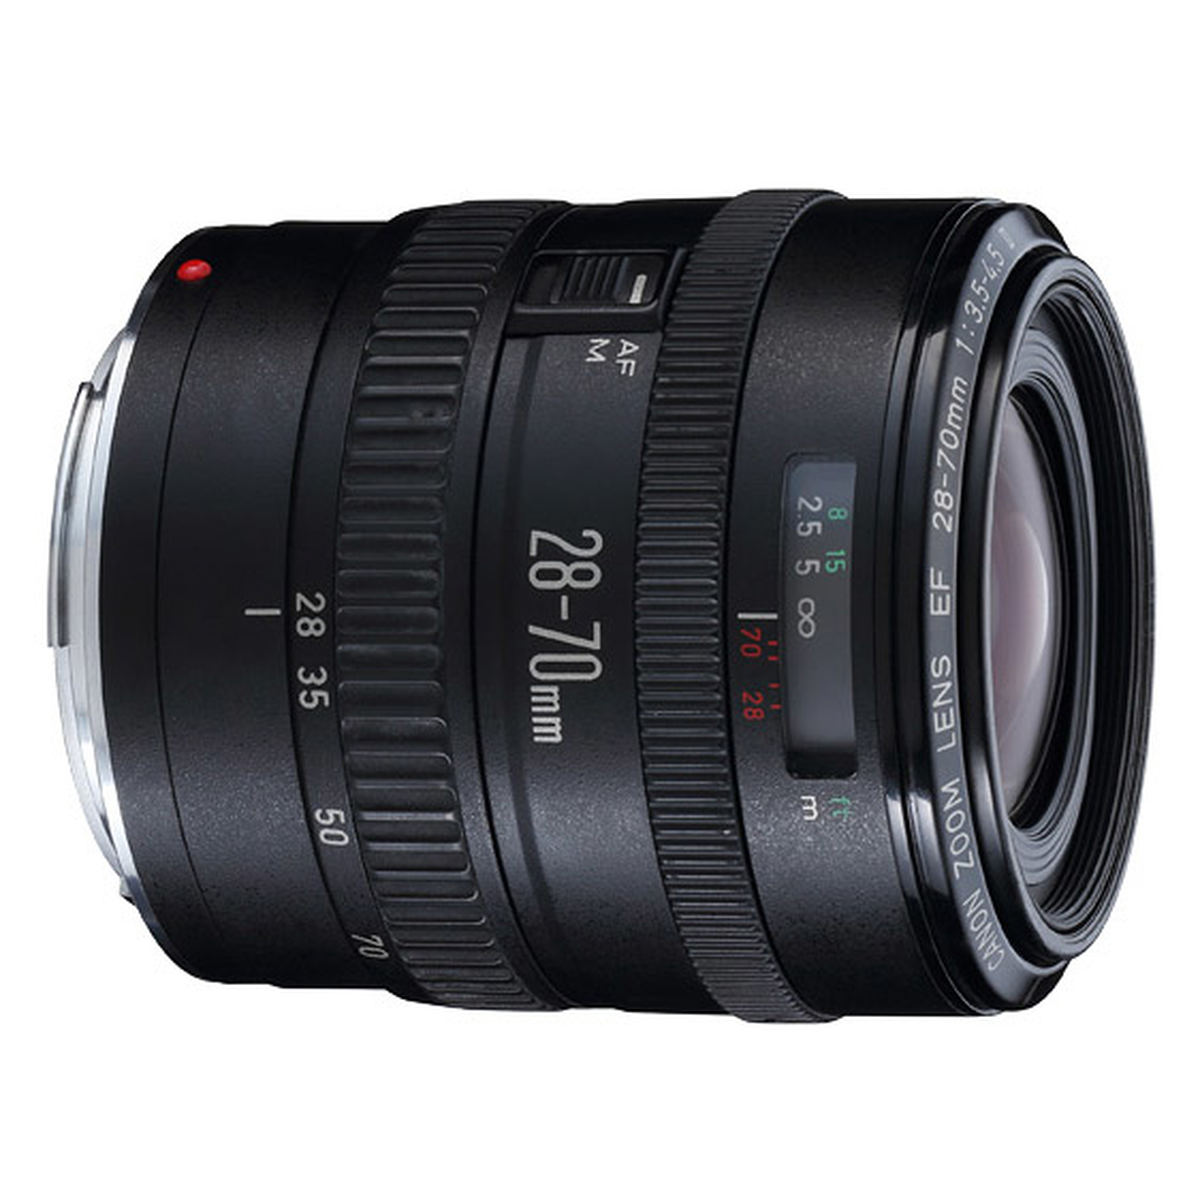 Canon EF 28-70mm f/3.5-4.5 II : Specifications and Opinions | JuzaPhoto